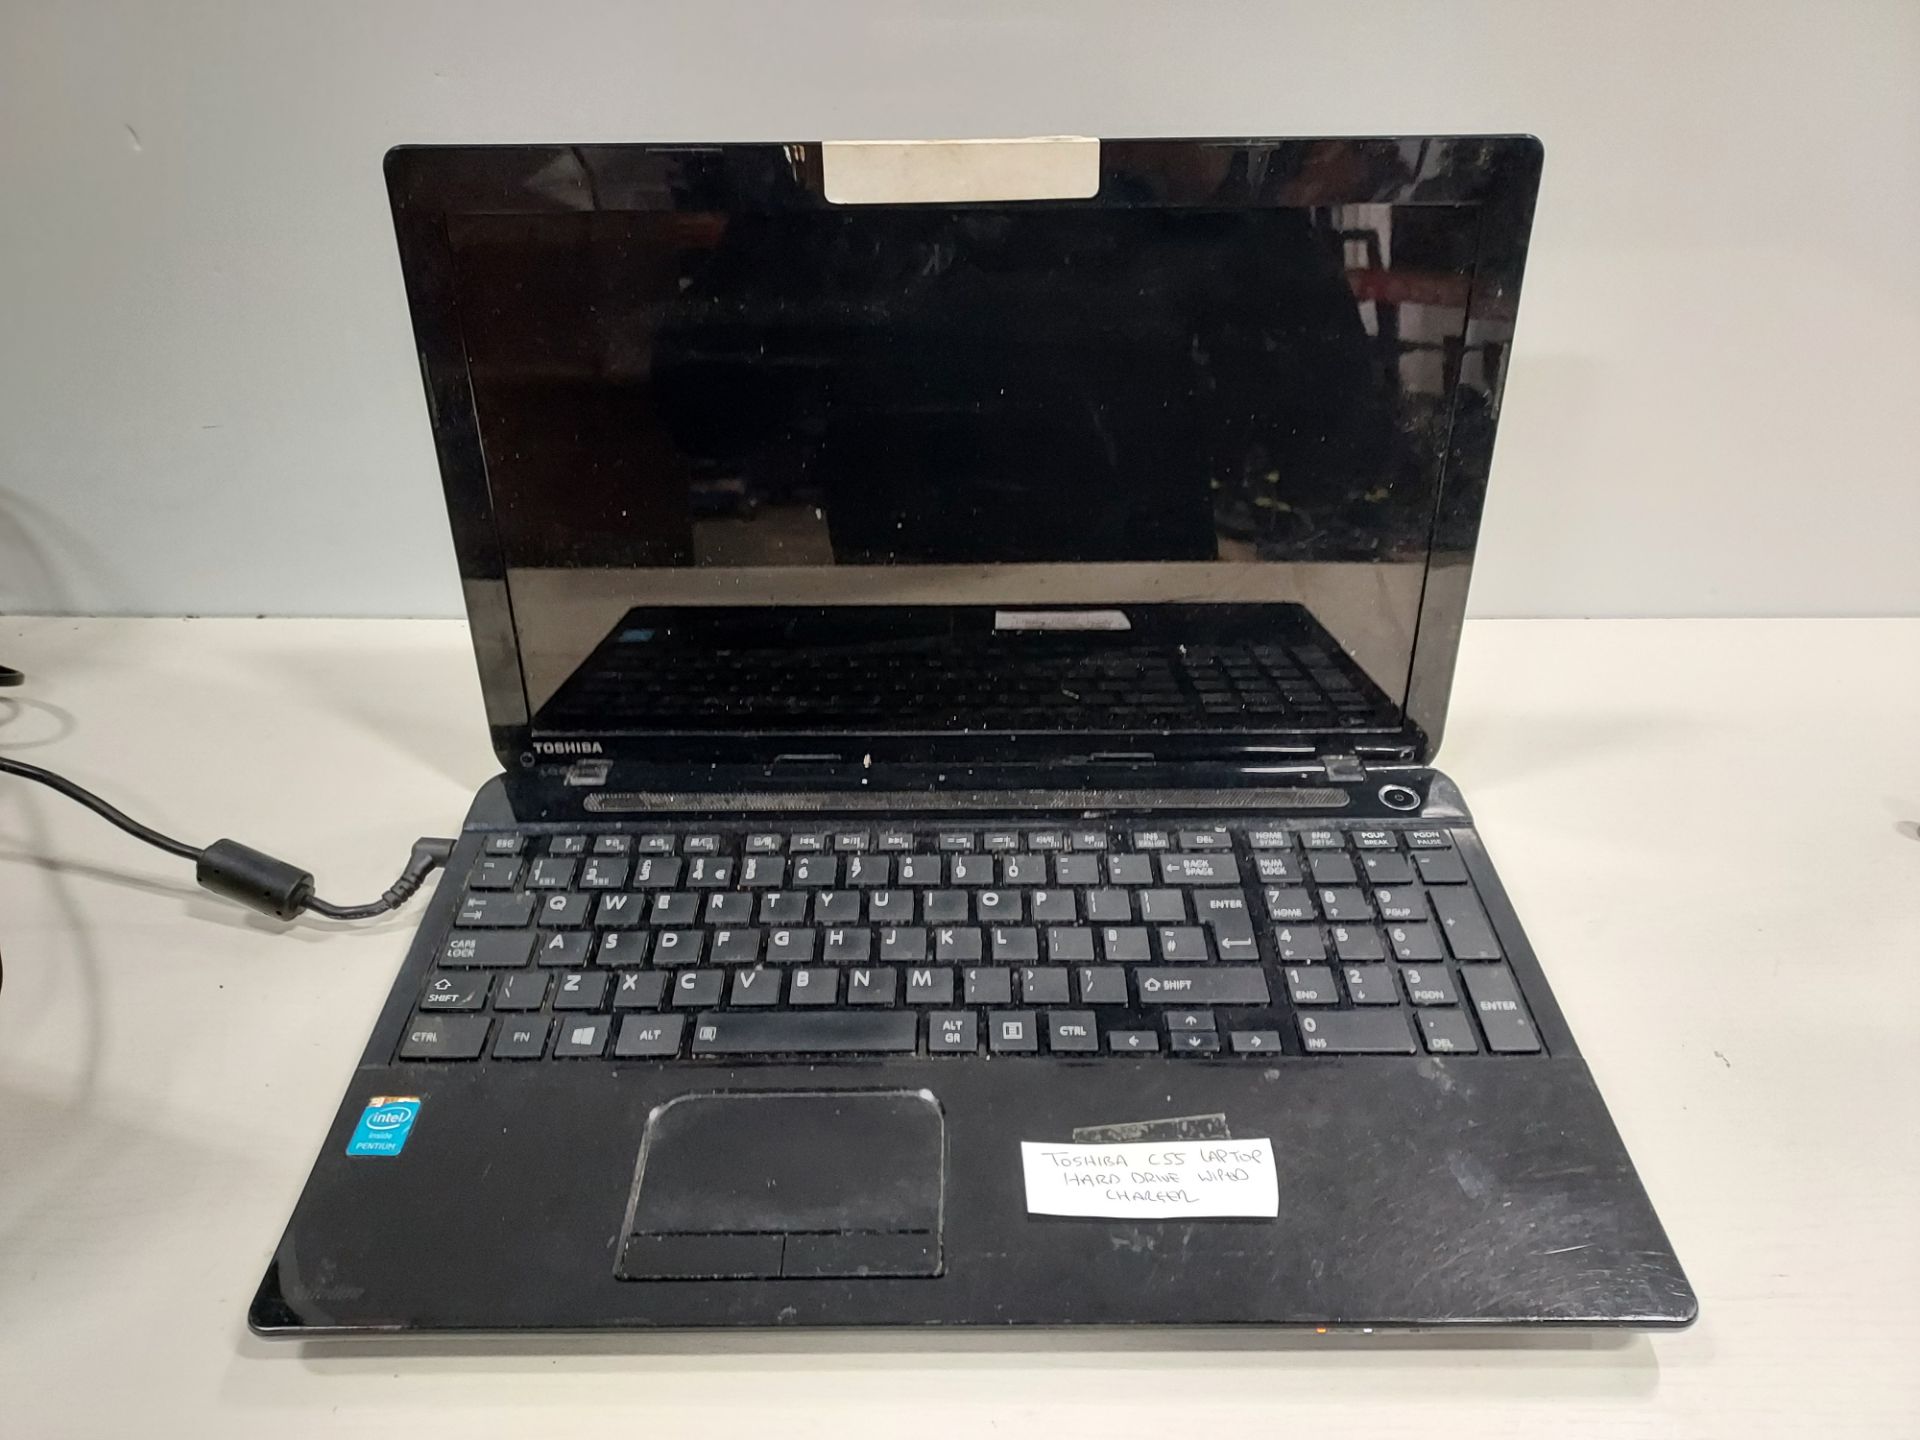 1 X TOSHIBA C55 LAPTOP - HARD DRIVE WIPED -NO OS- WITH CHARGER -